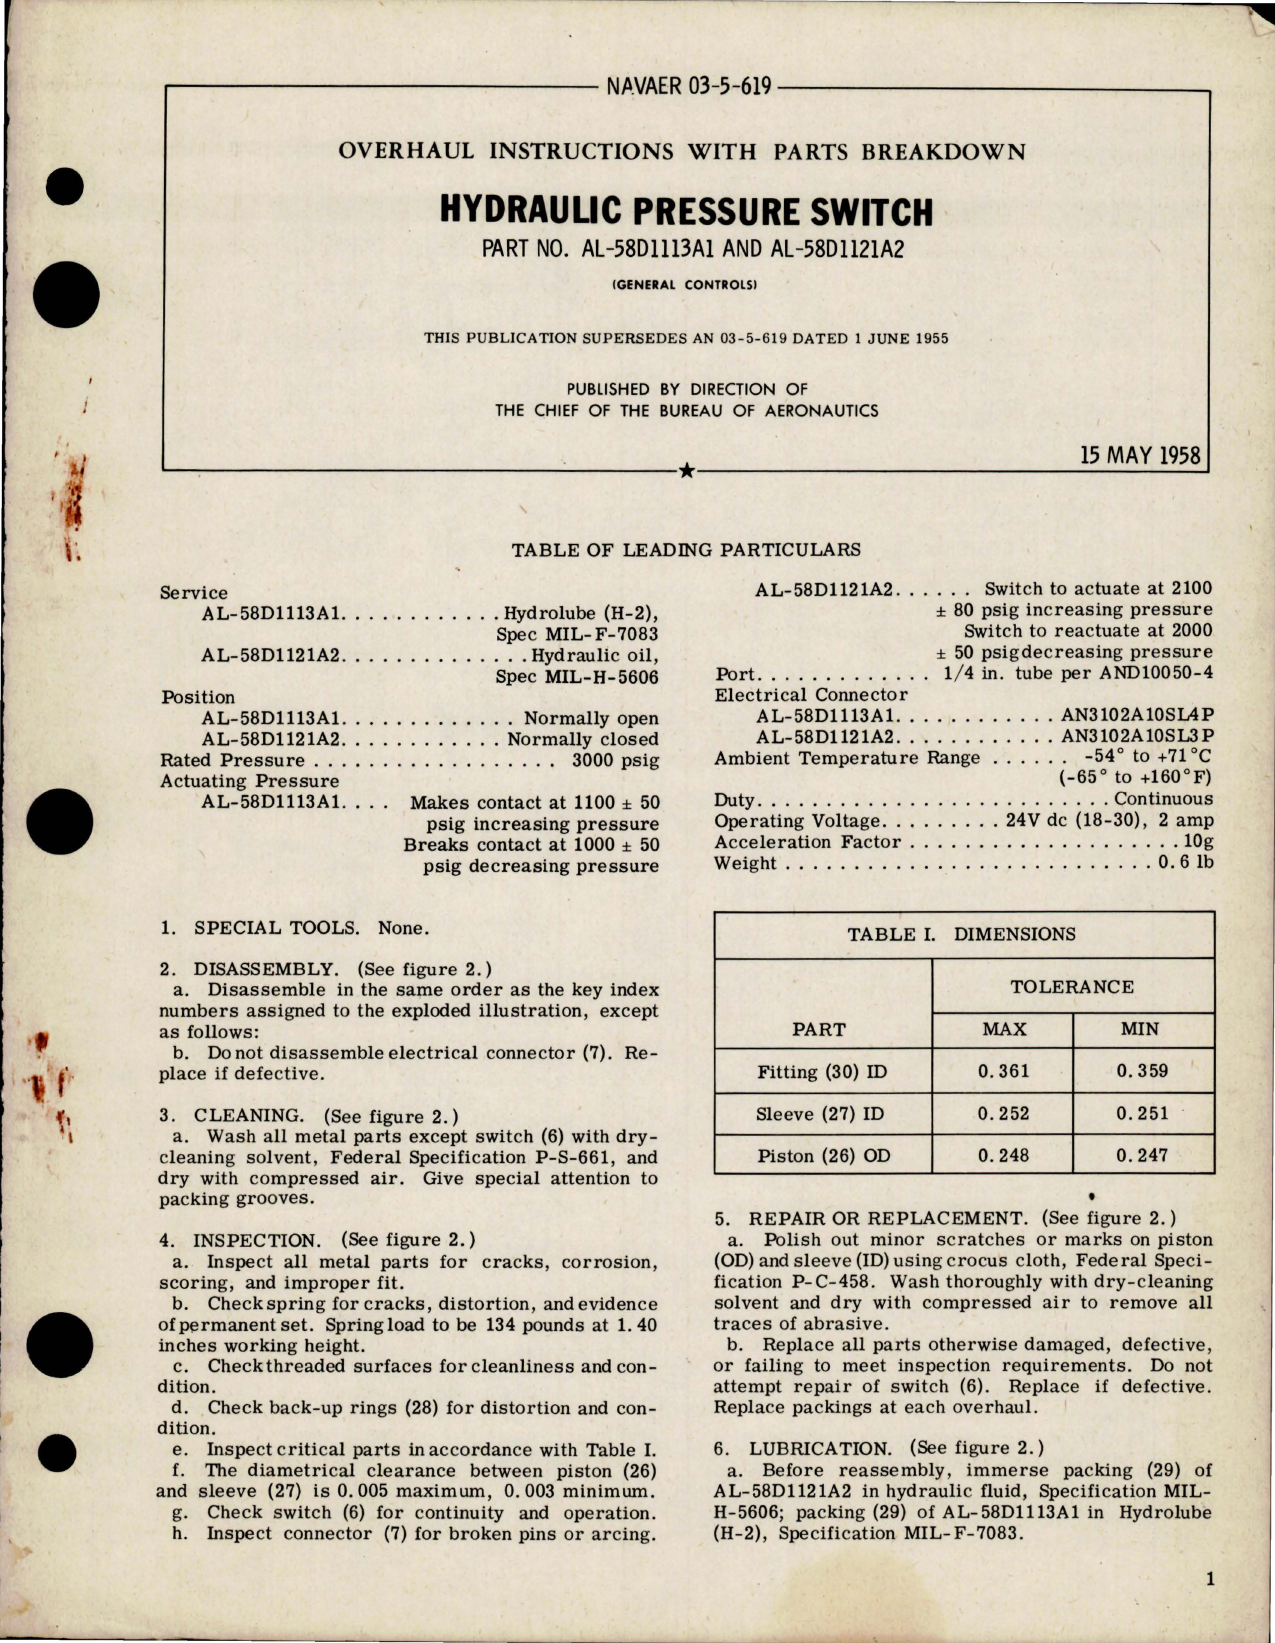 Sample page 1 from AirCorps Library document: Overhaul Instructions with Parts Breakdown for Hydraulic Pressure Switch - Part AL-58D1113A1 and AL-58D1121A2